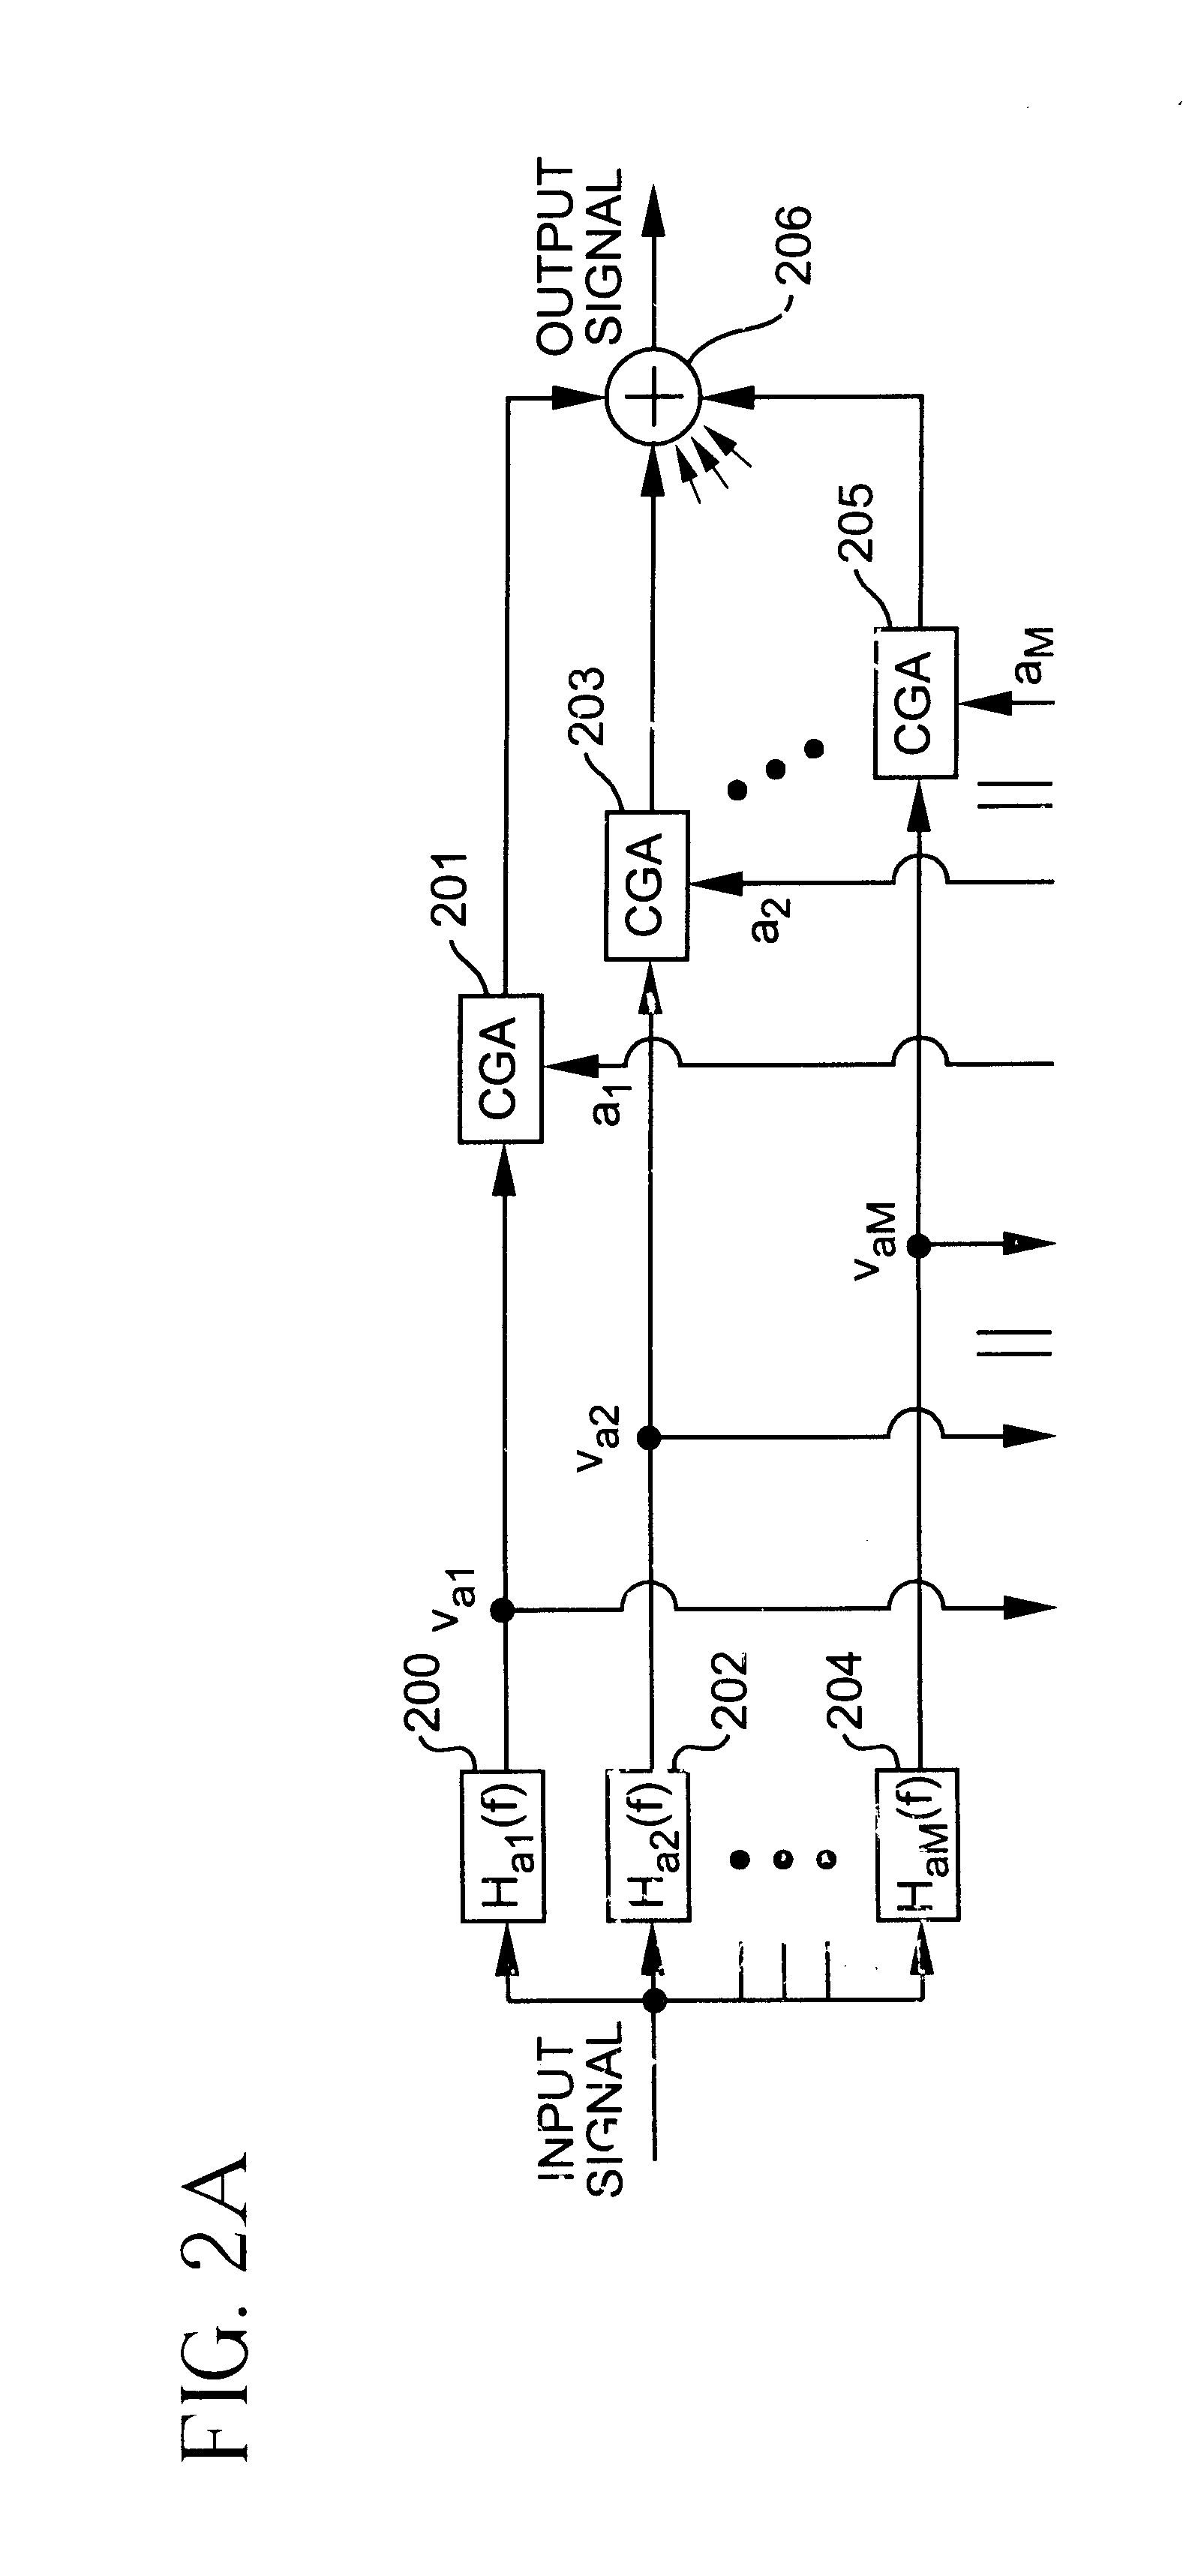 Decorrelated power amplifier linearizers